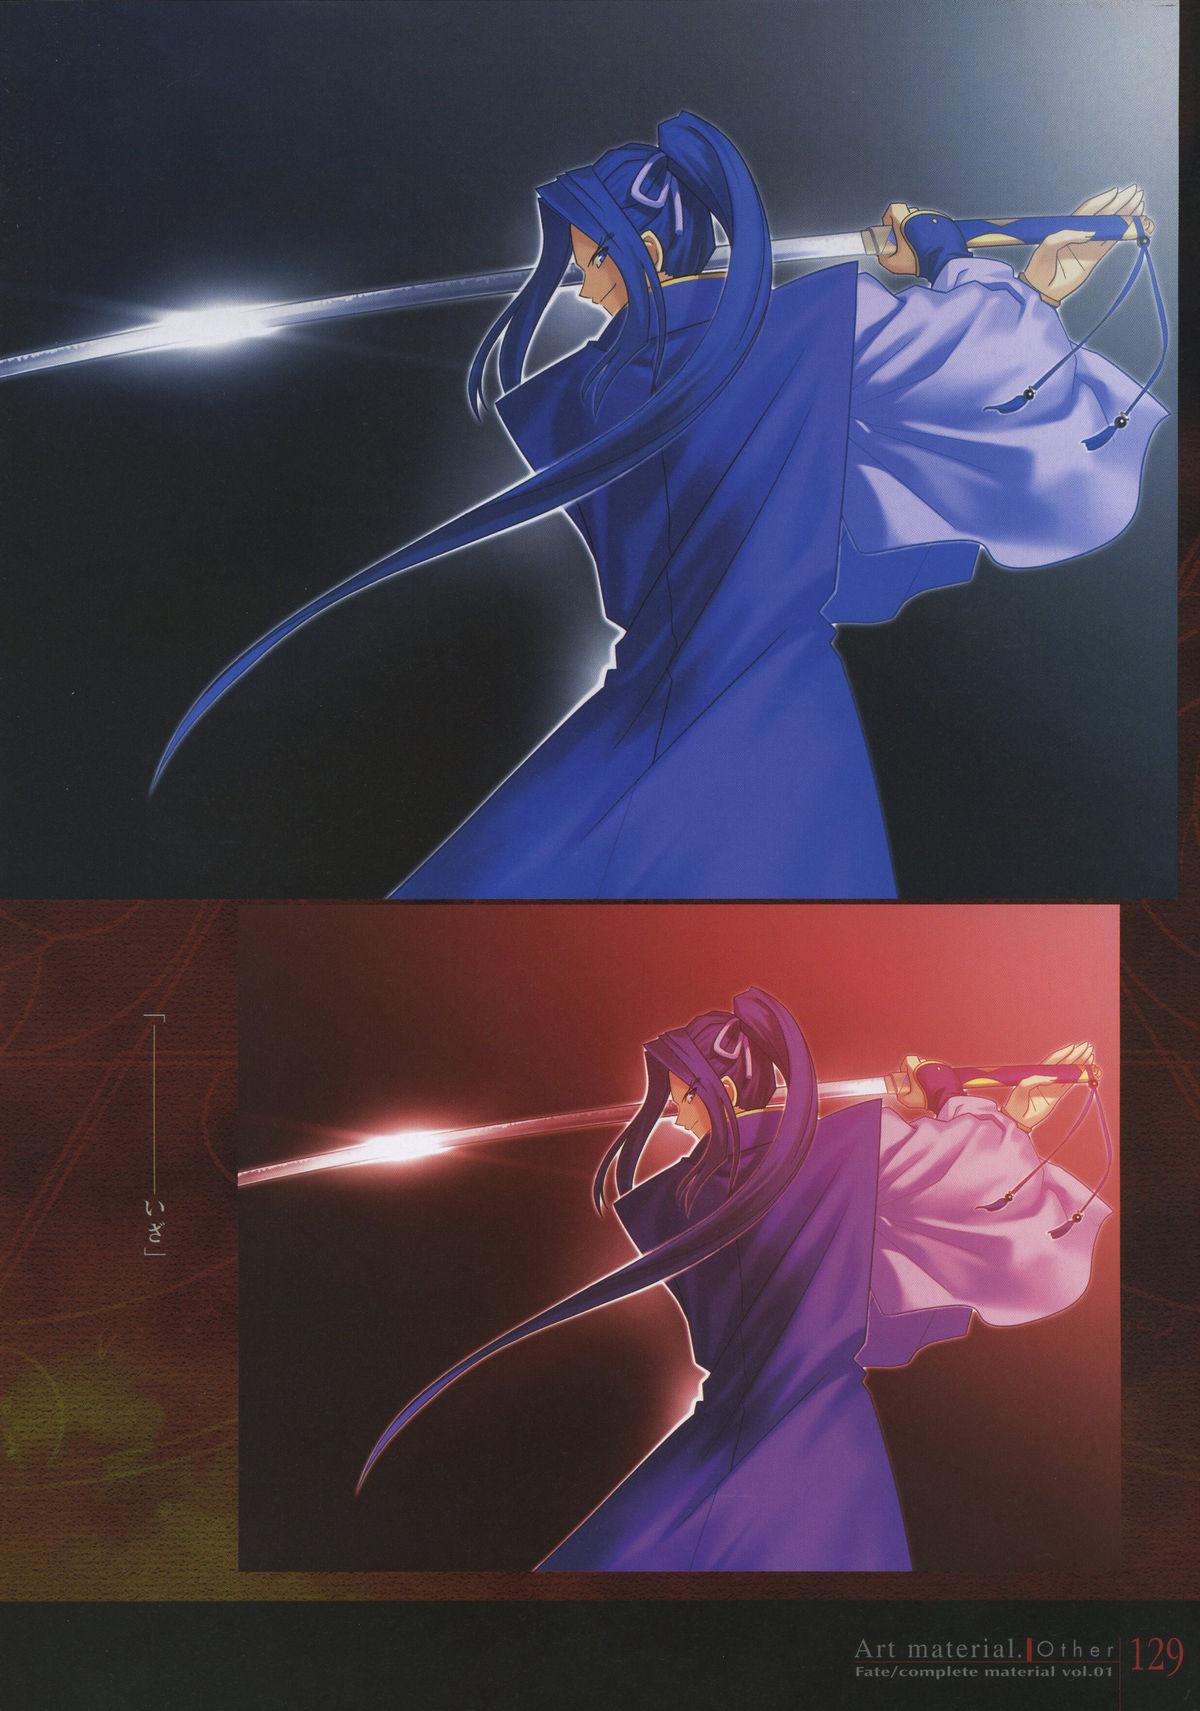 Fate/complete material I - Art material. 133